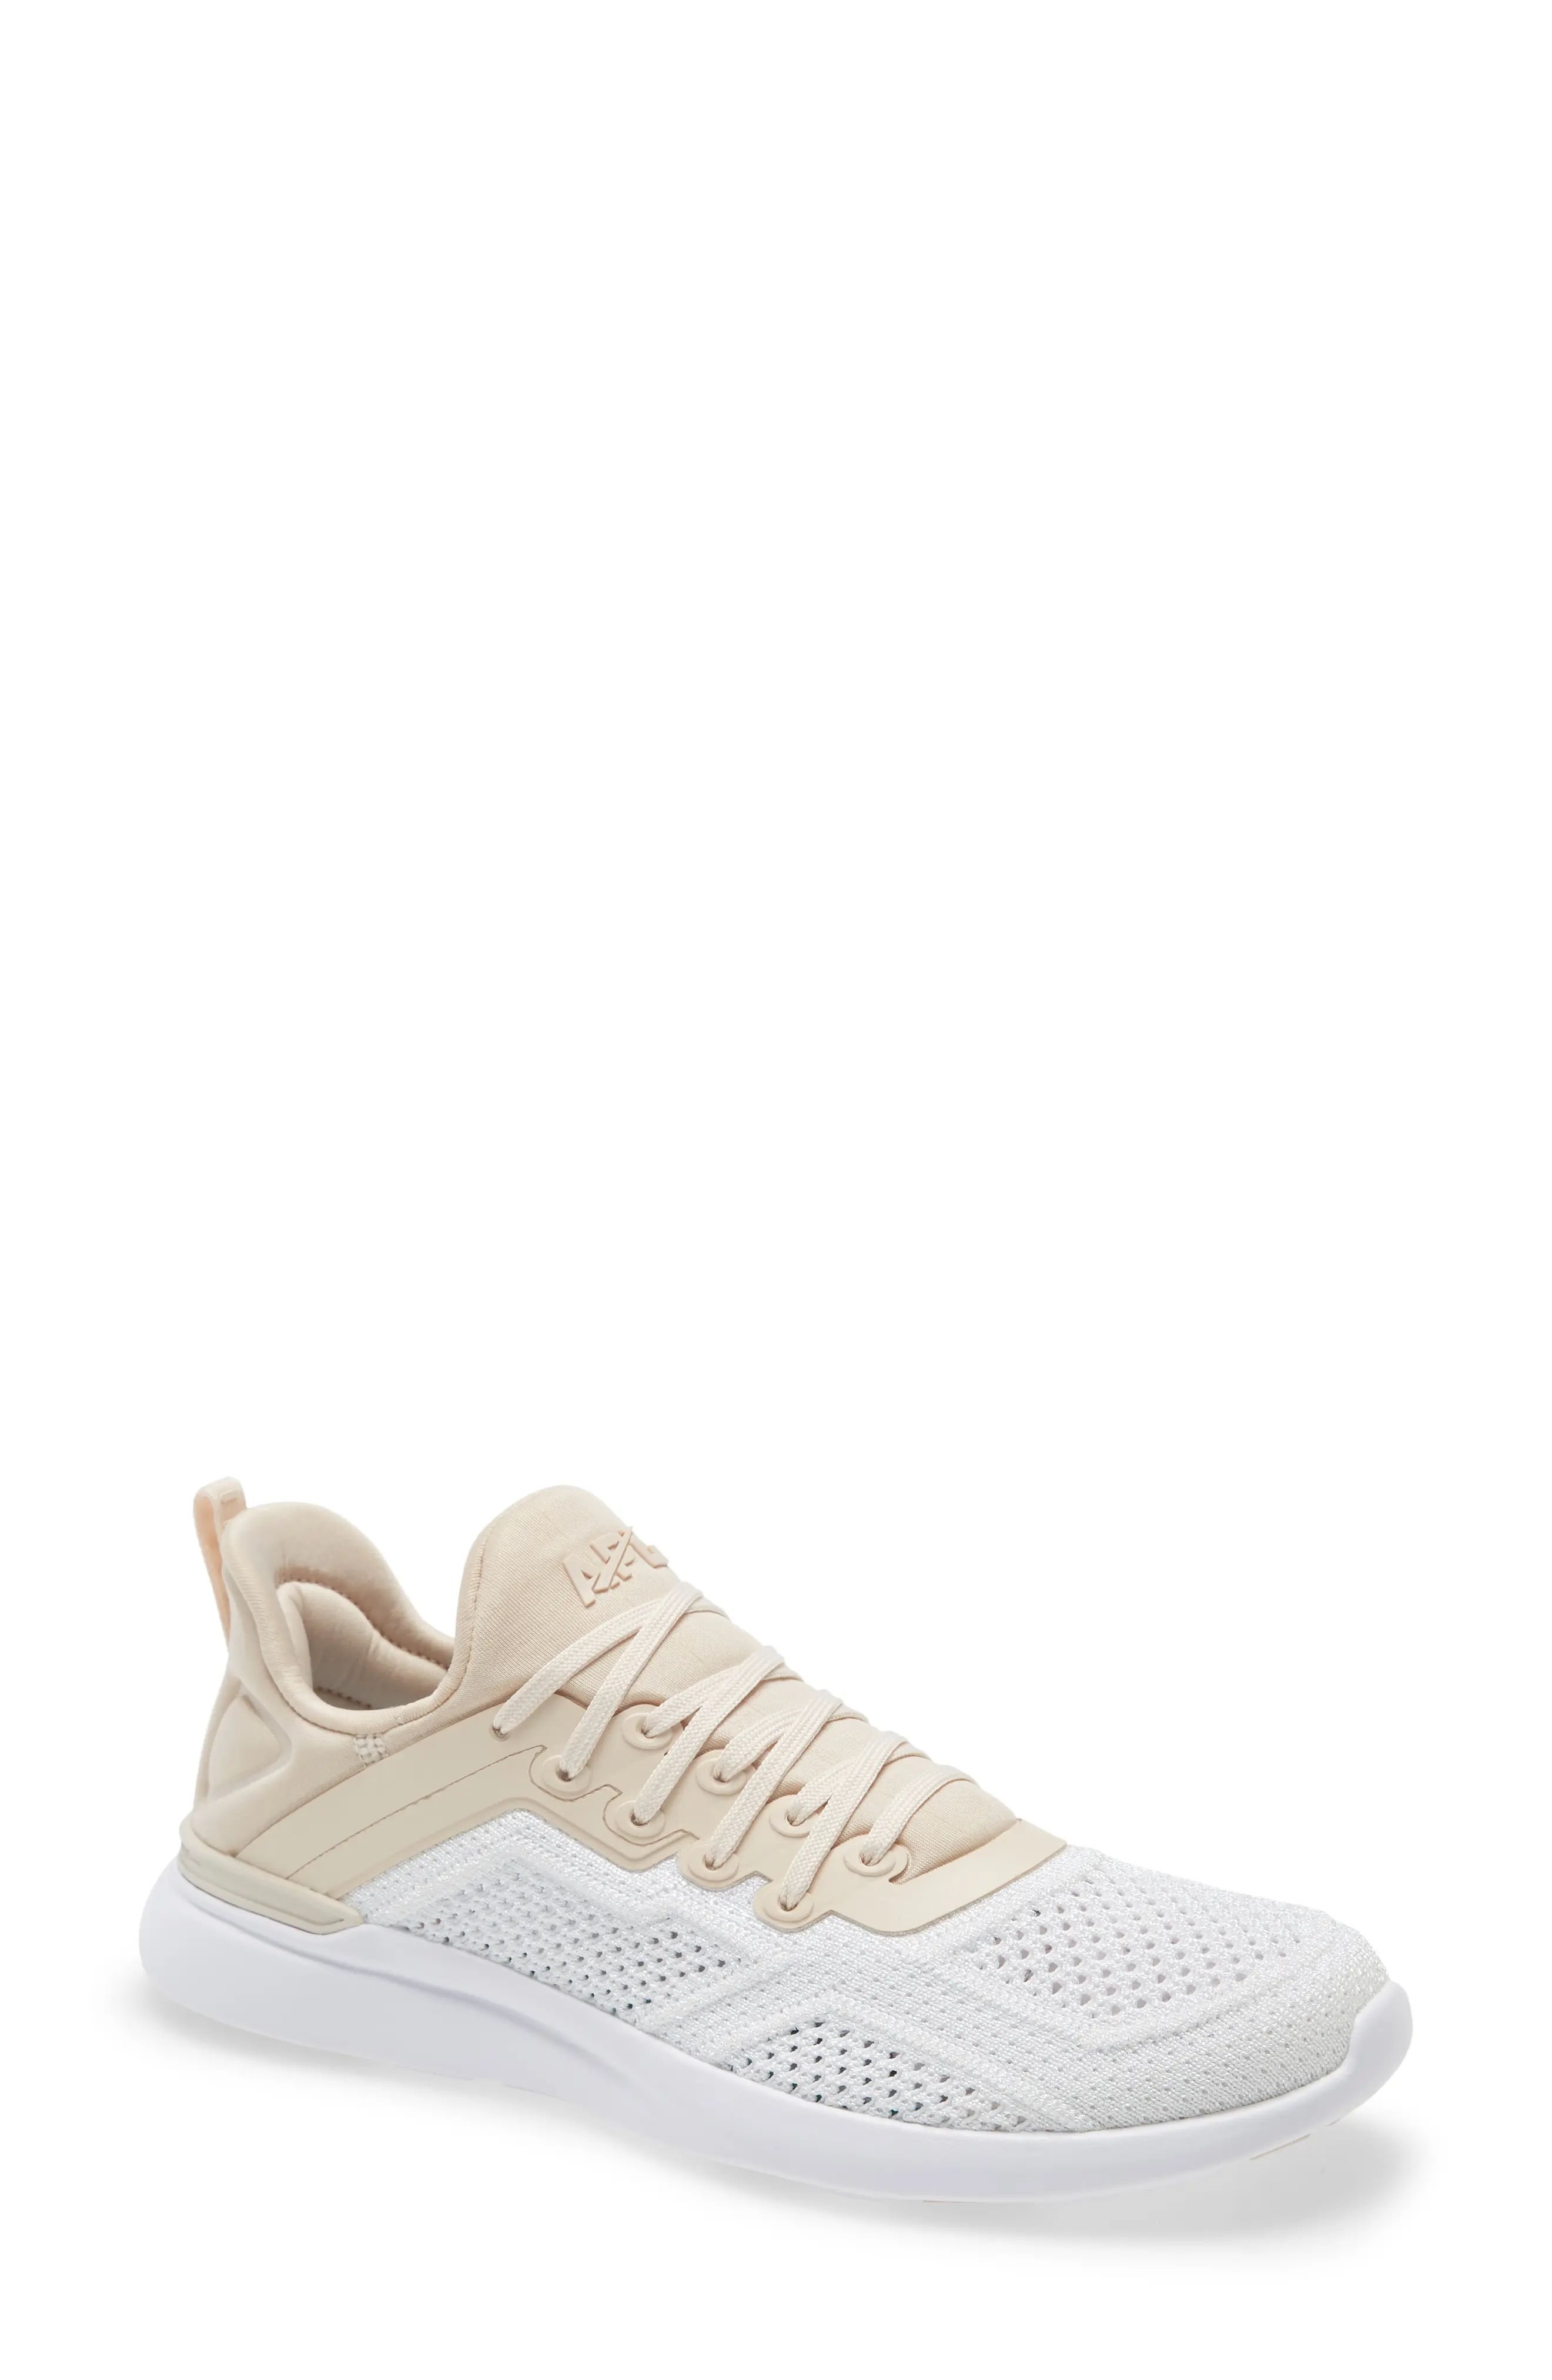 APL TechLoom Tracer Knit Training Shoe in Beach /Metallic Pearl /White at Nordstrom, Size 9 | Nordstrom